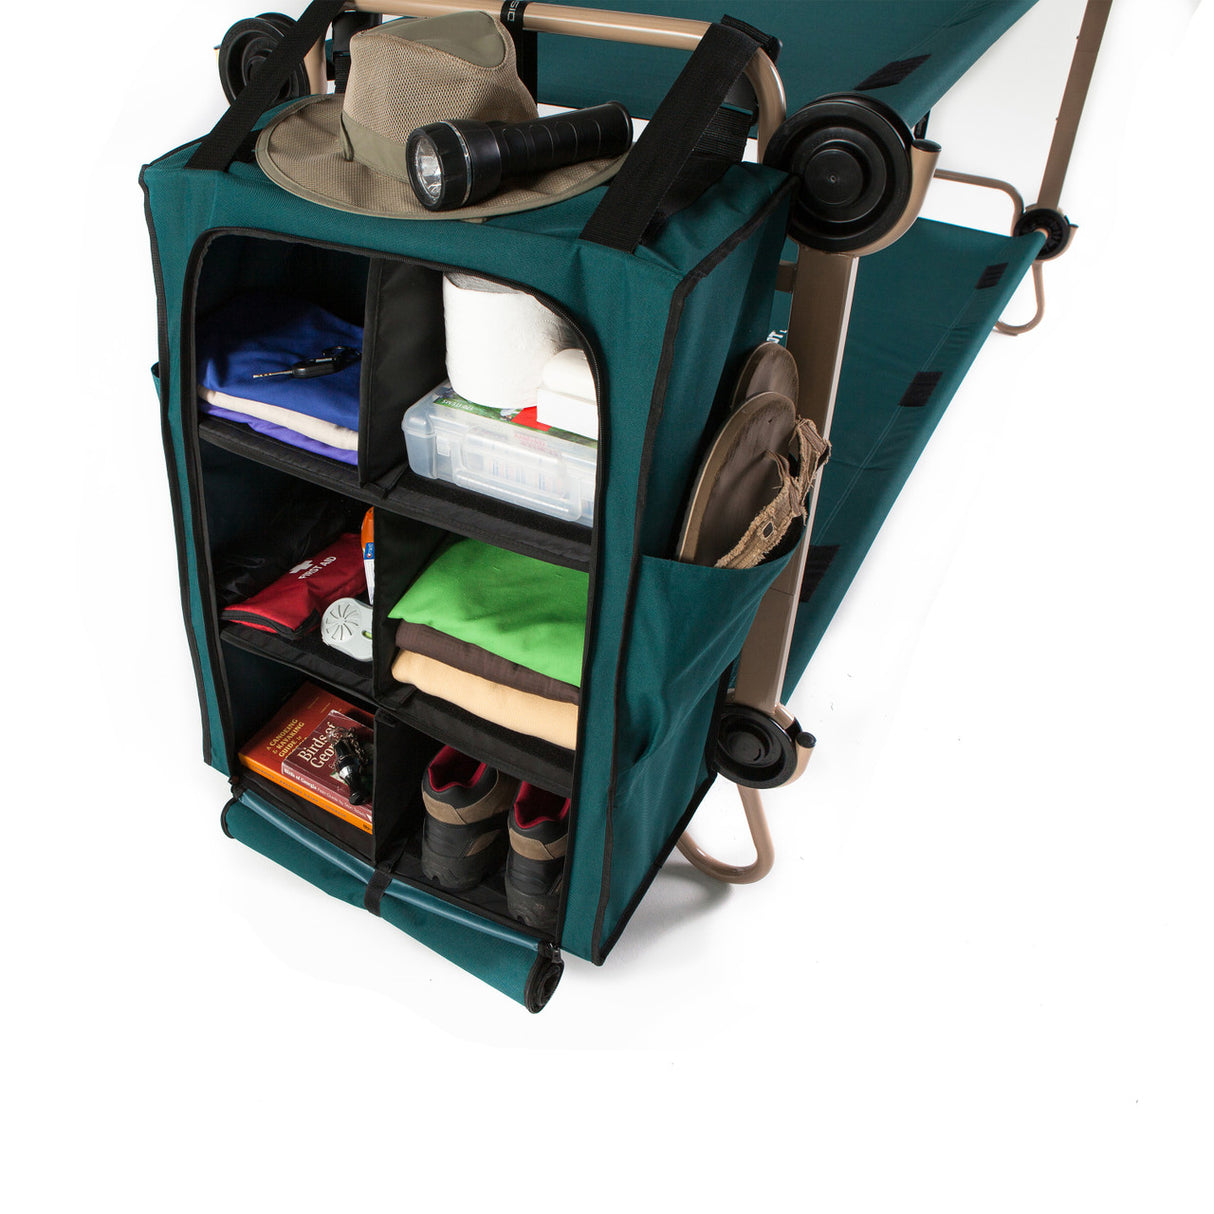 Disc-O-Bed Storage Cabinet - Green